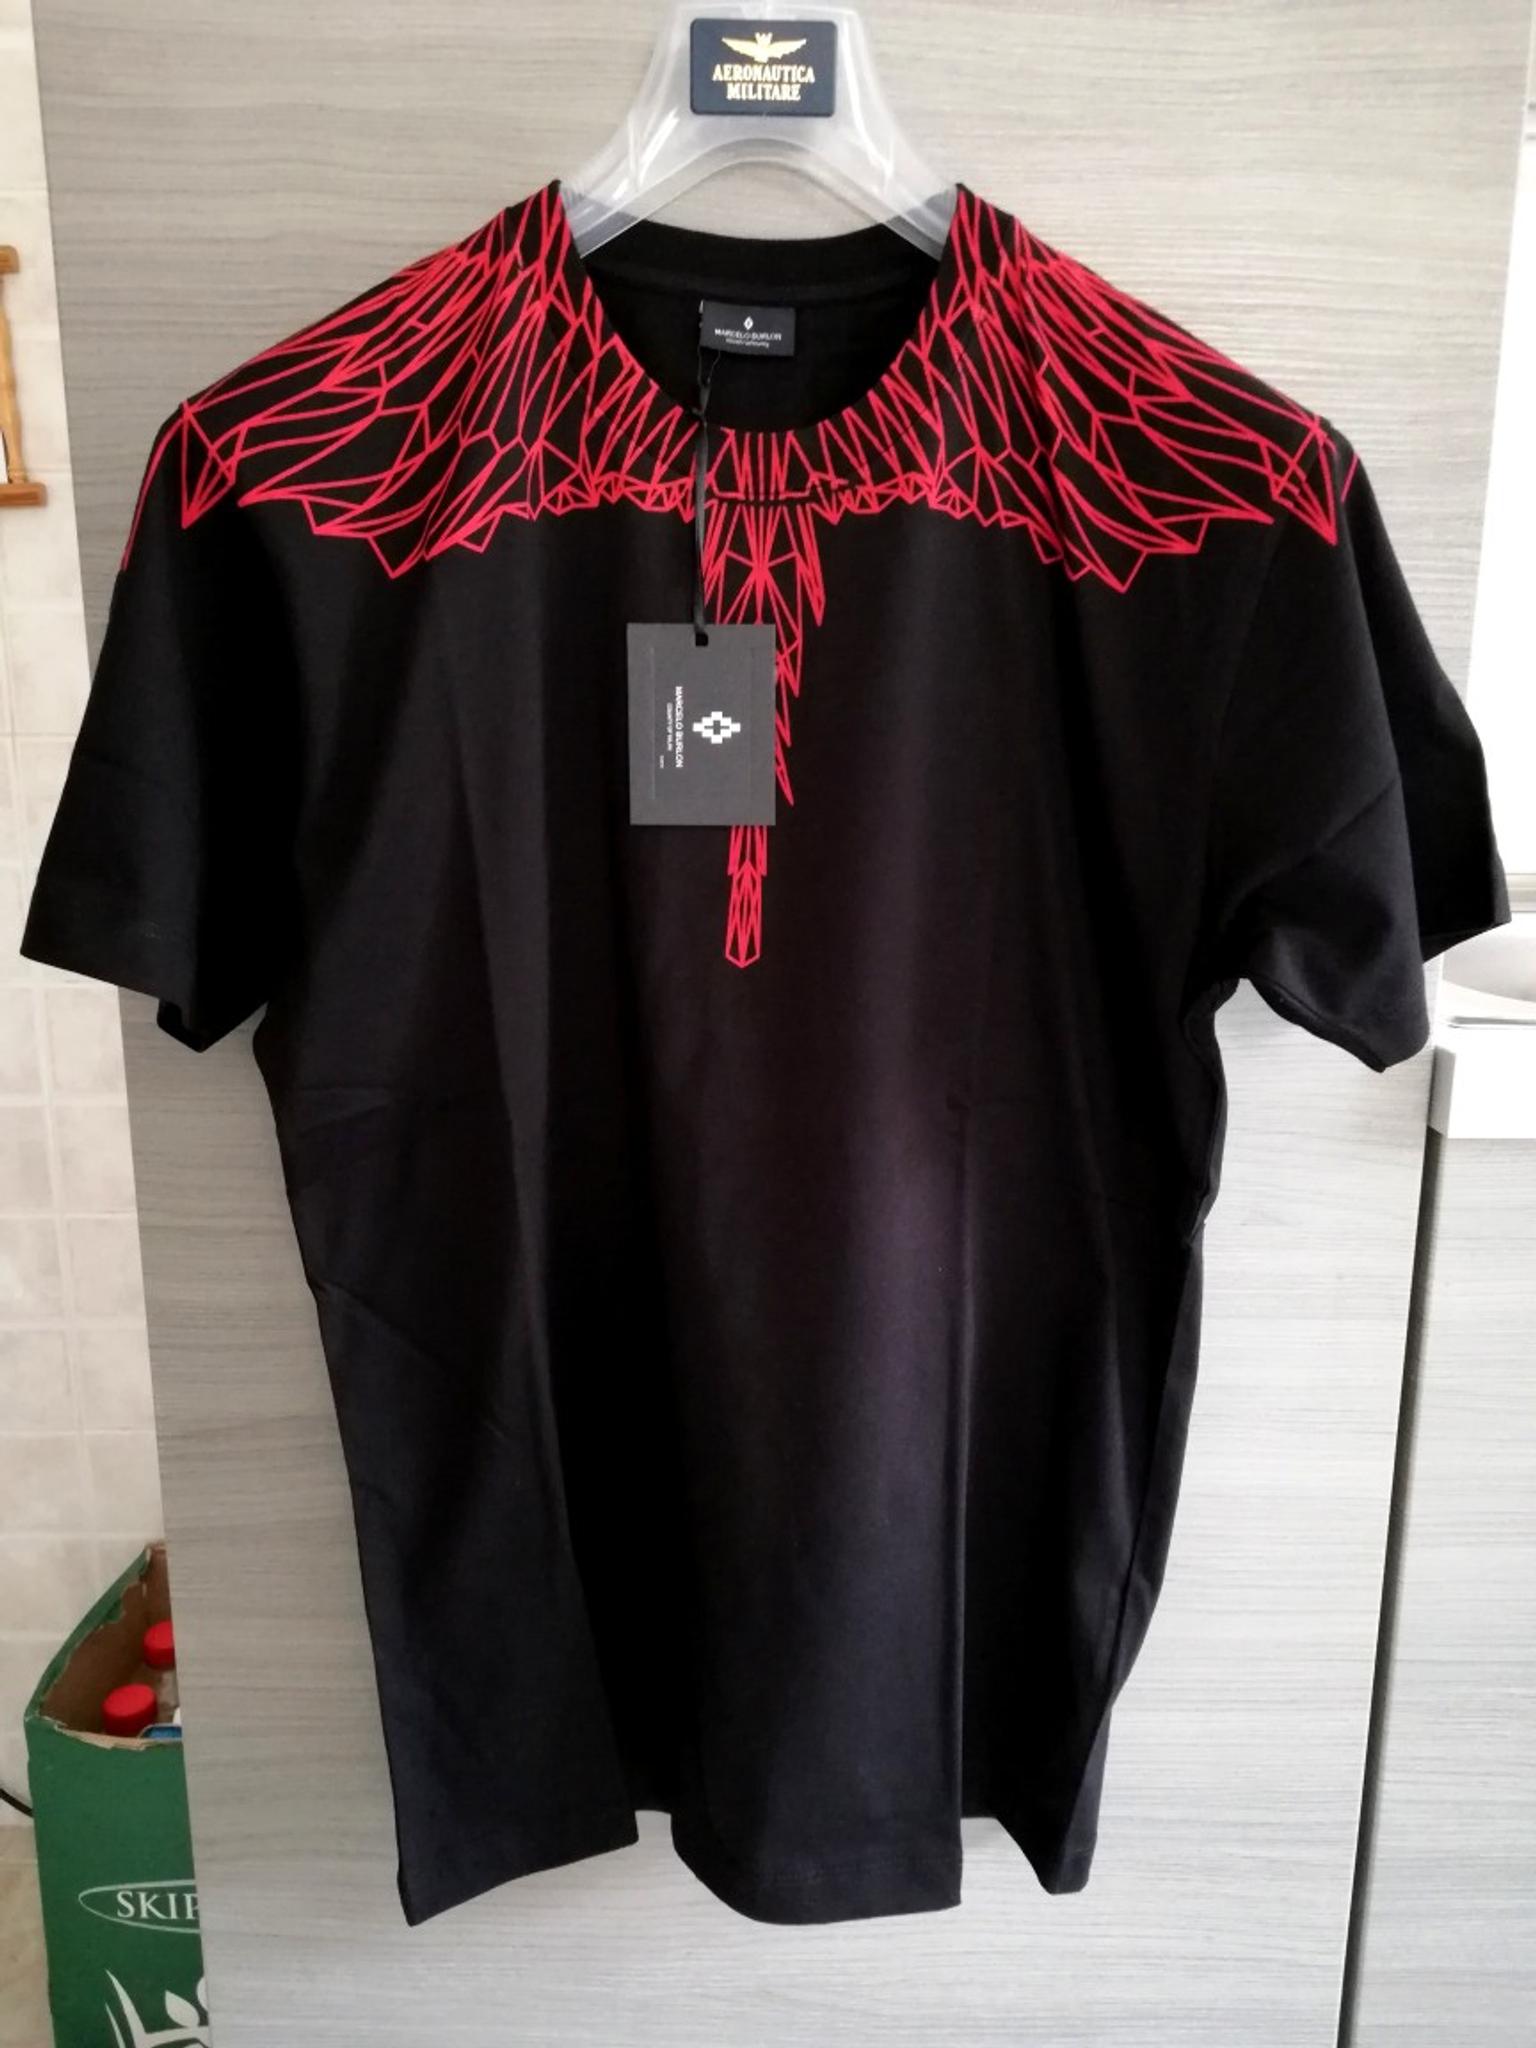 T-shirt MARCELO BURLON black wings red in Itri for €99.00 for sale 